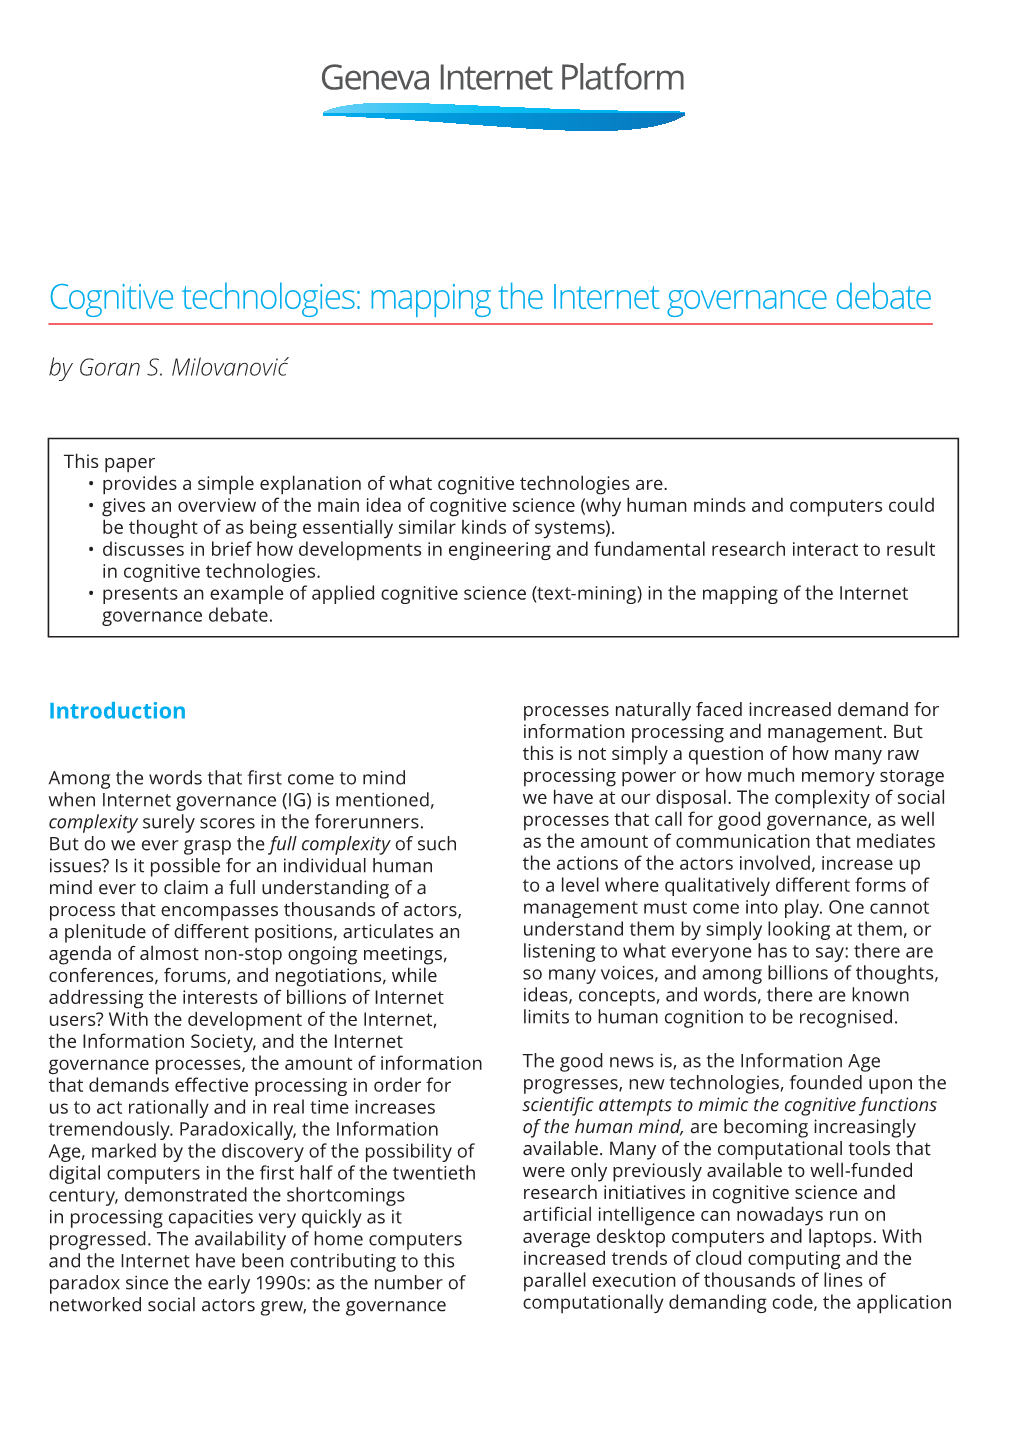 Cognitive Technologies: Mapping the Internet Governance Debate by Goran S